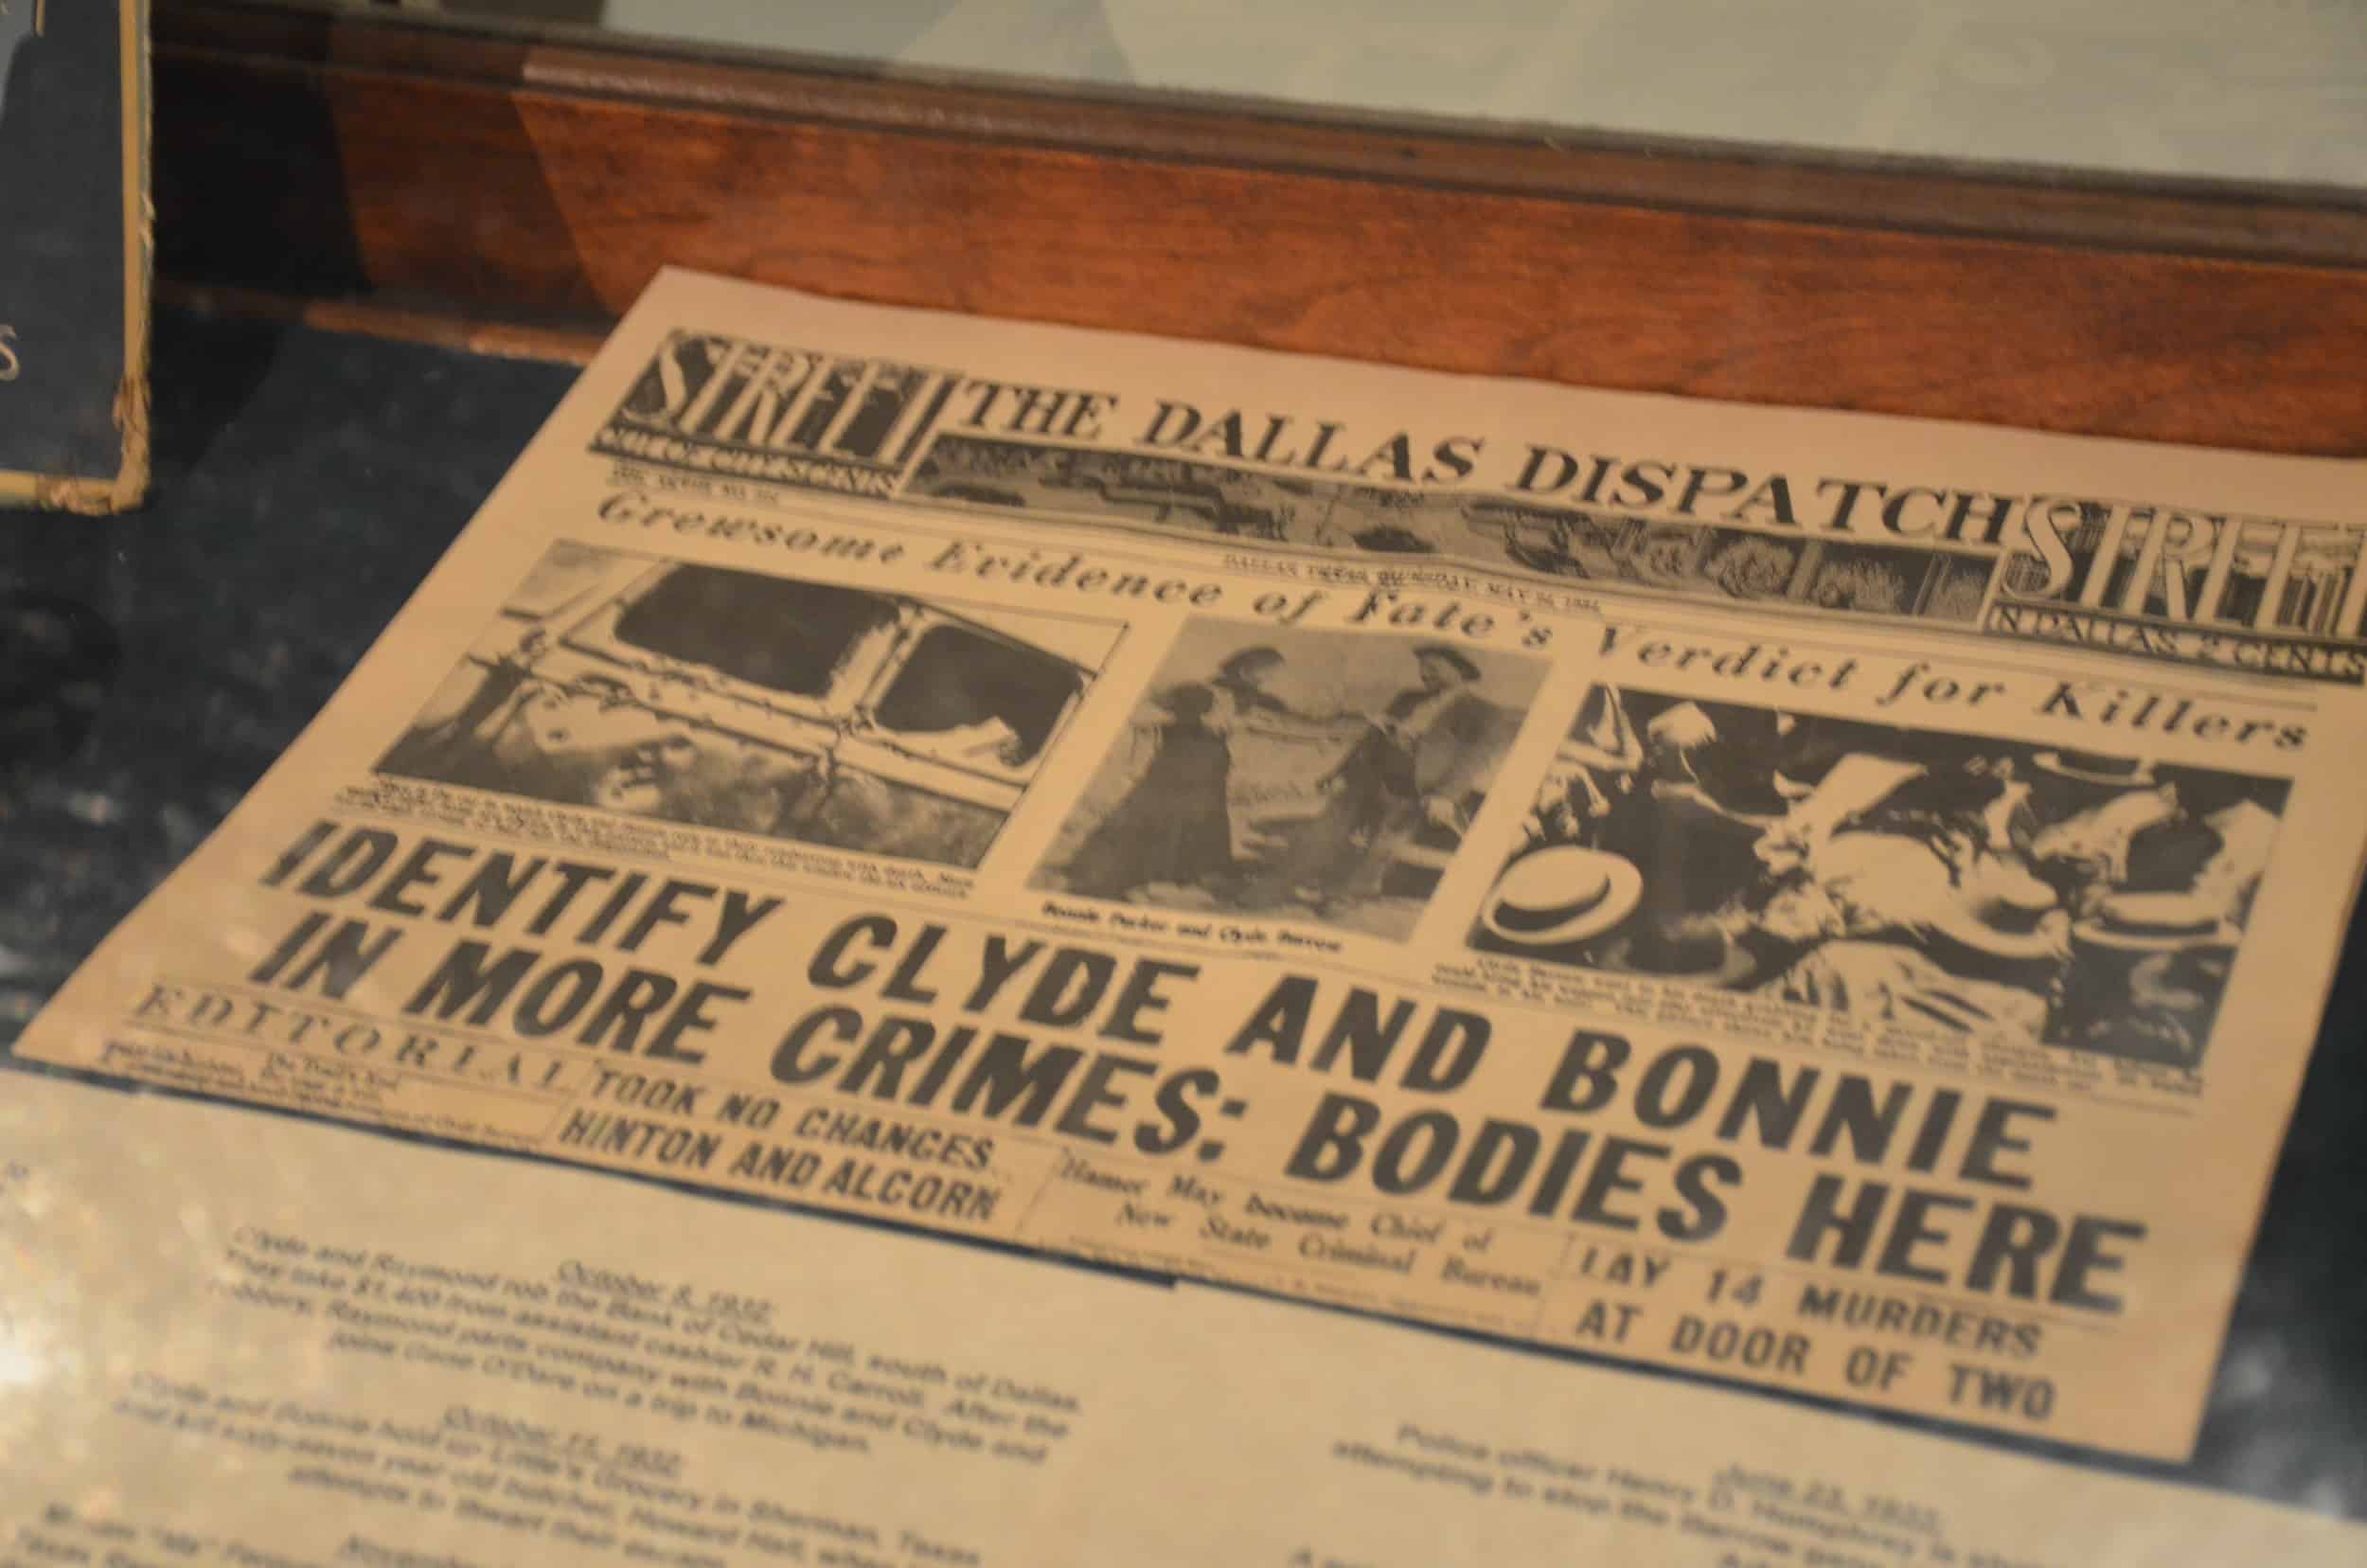 Newspaper article about Bonnie and Clyde at the Texas Ranger Museum in San Antonio, Texas